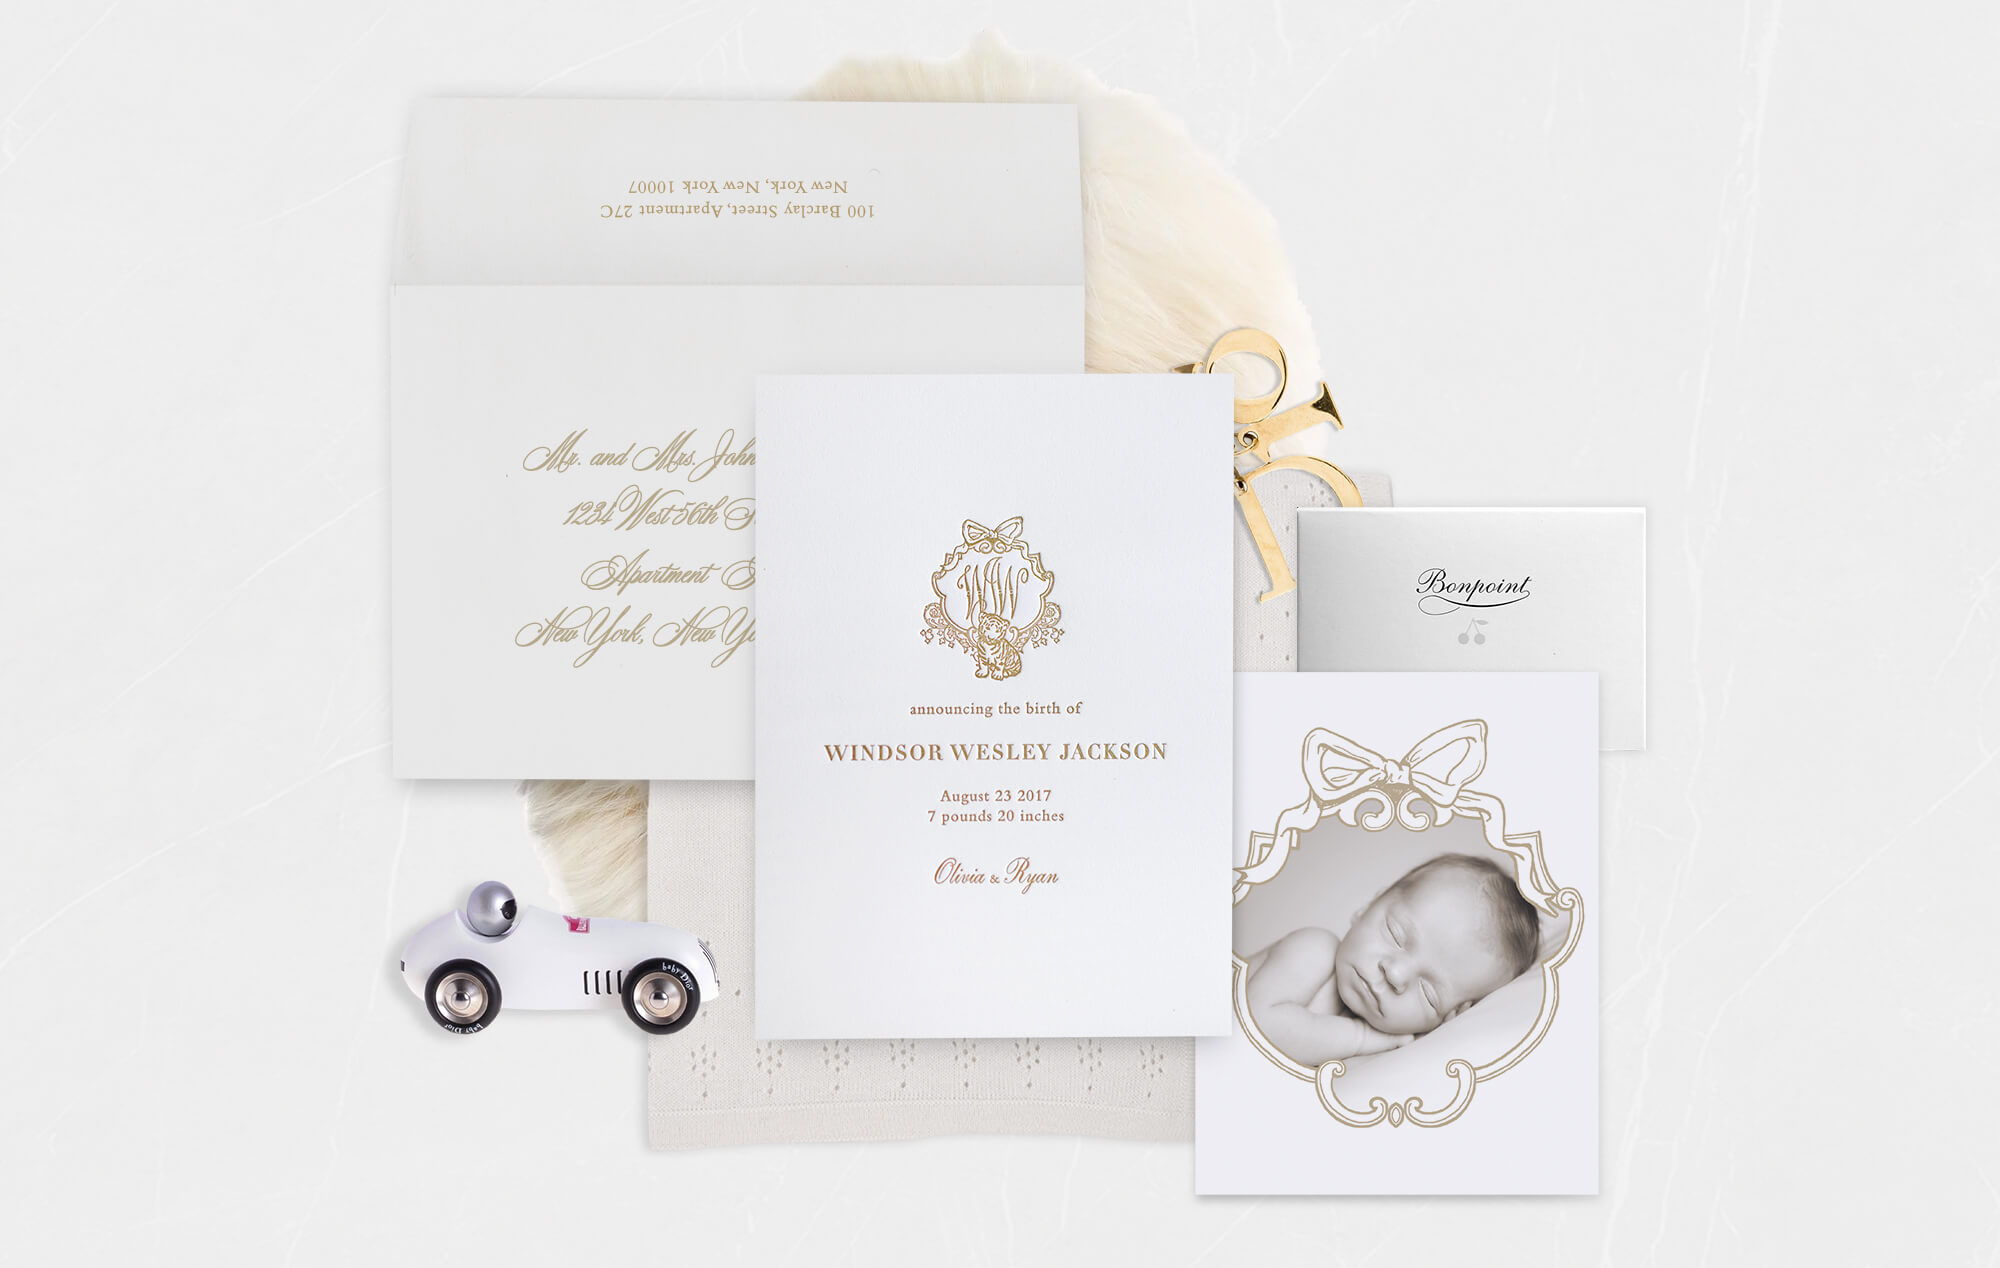 Luxe baby announcement printed in gold letterpress